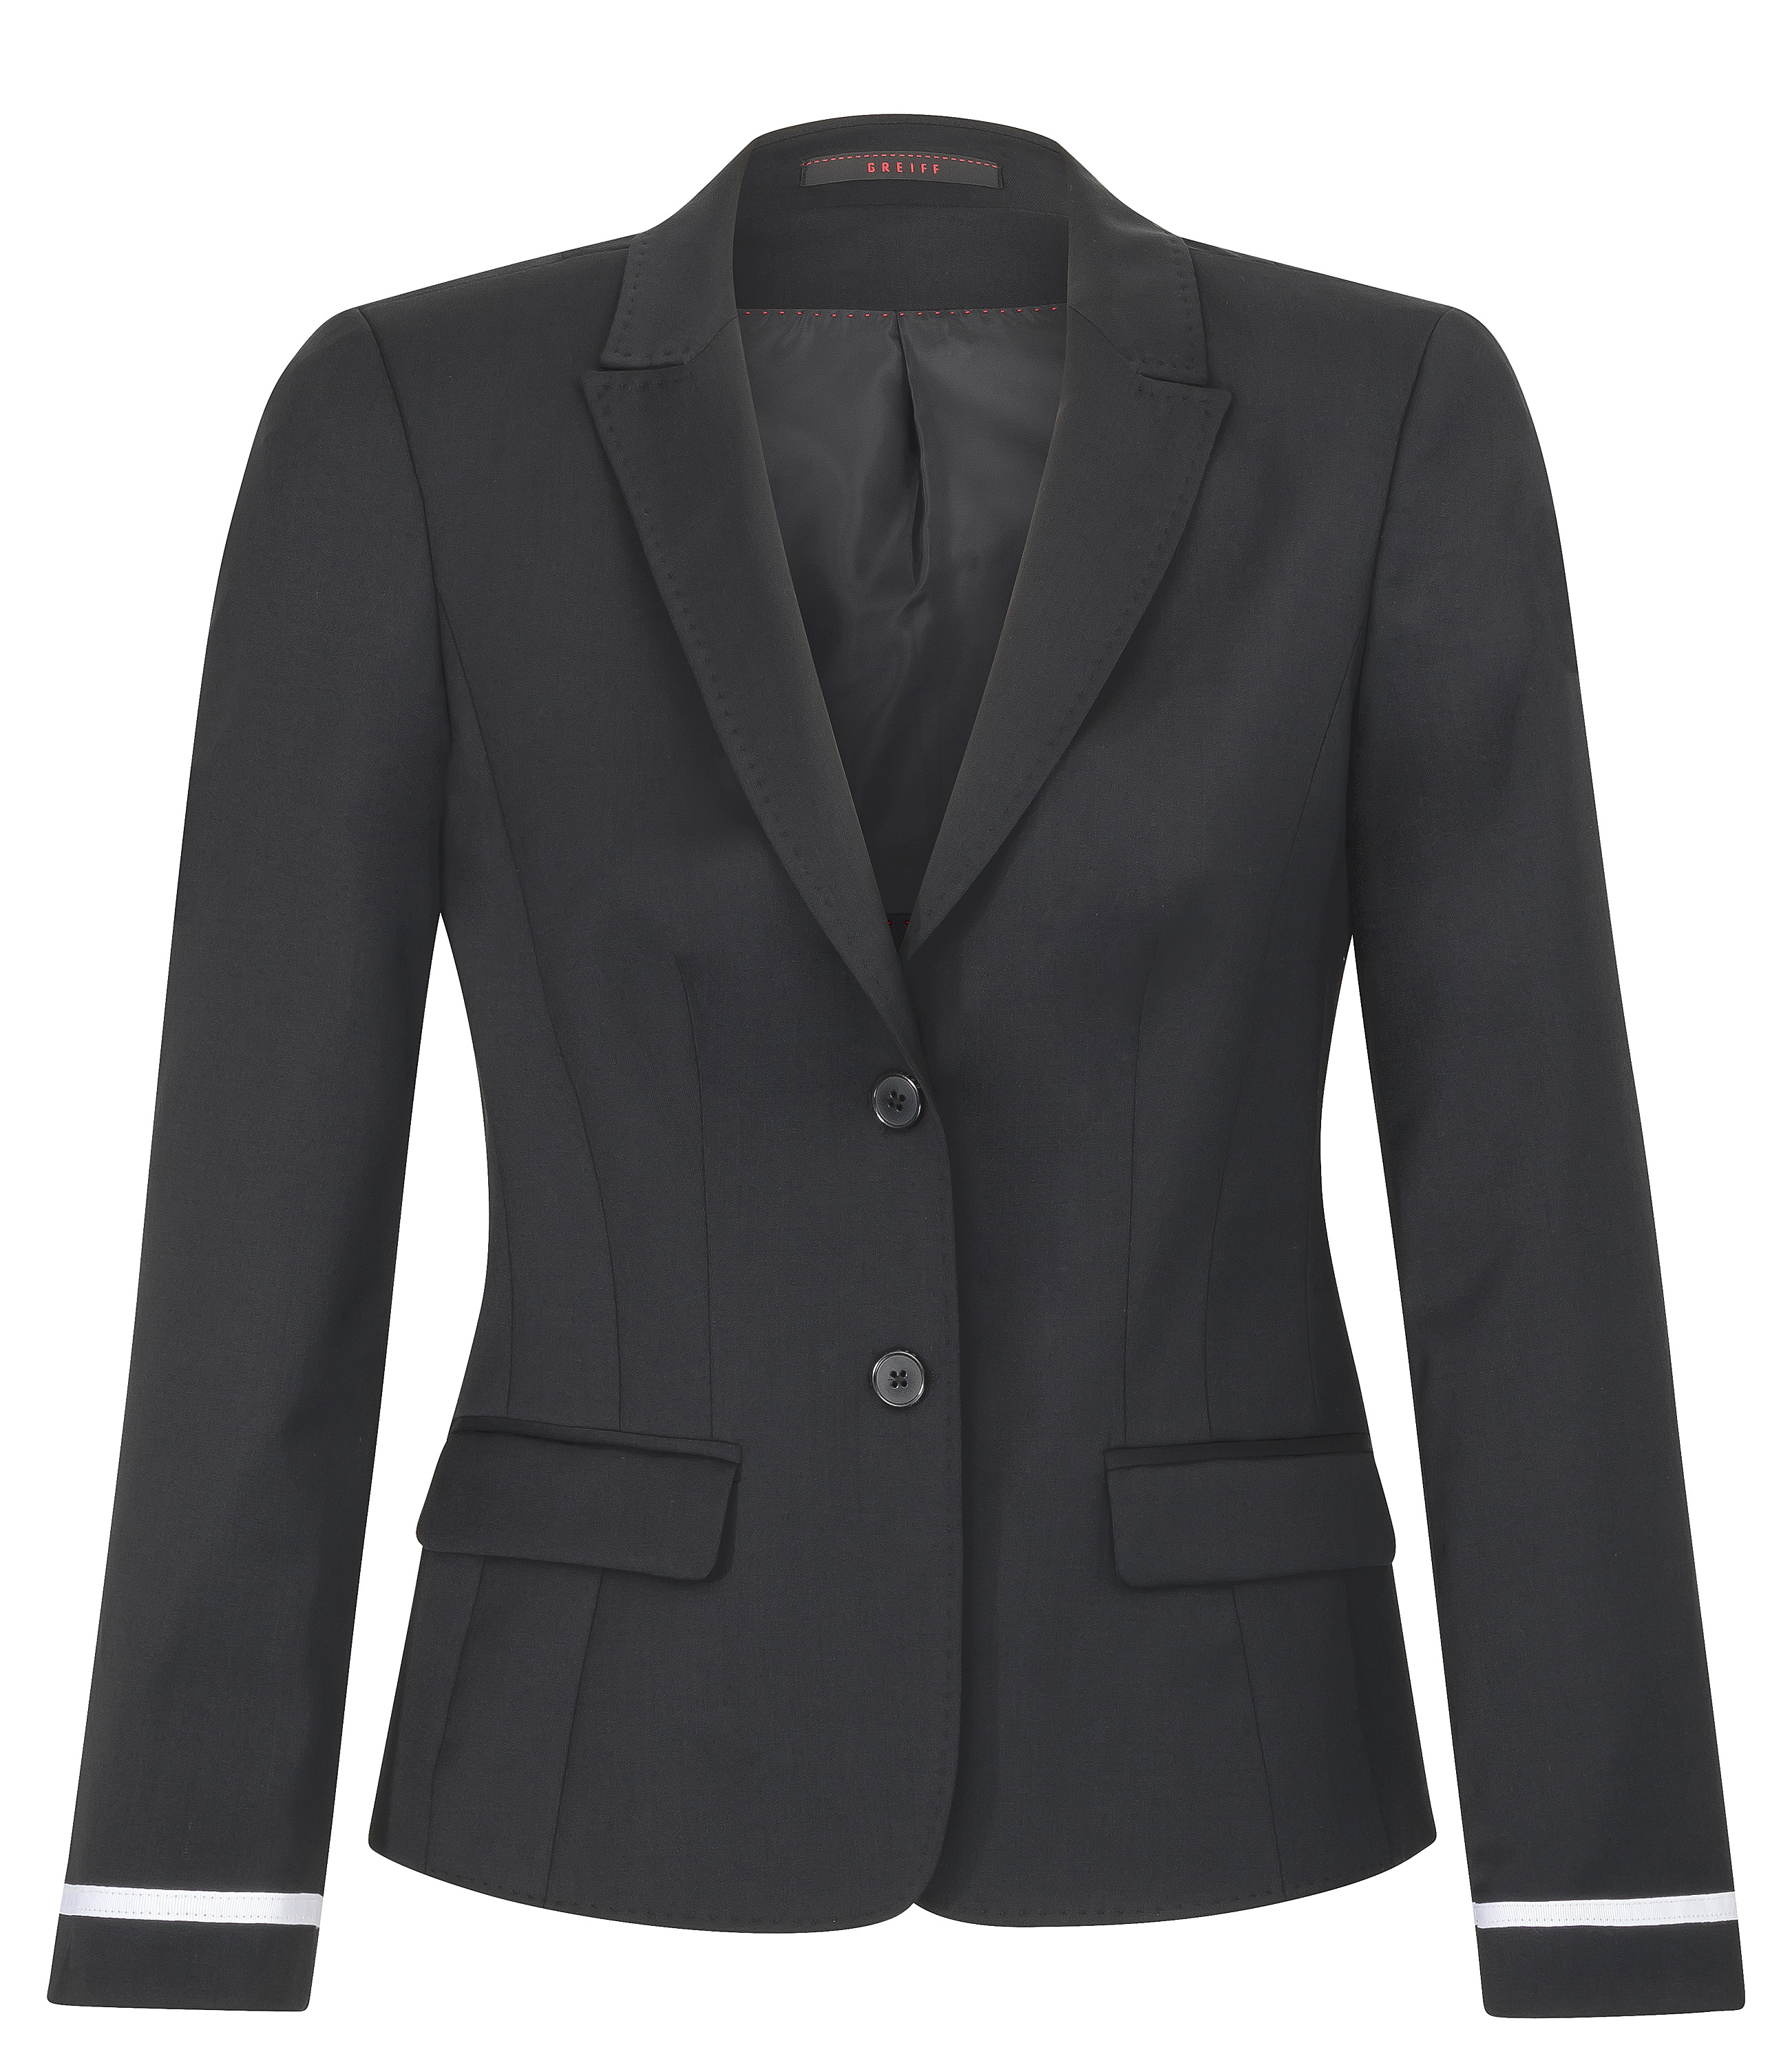 woman jacket 37,5 black with piping | Hotel Manager Female | Uniworld ...